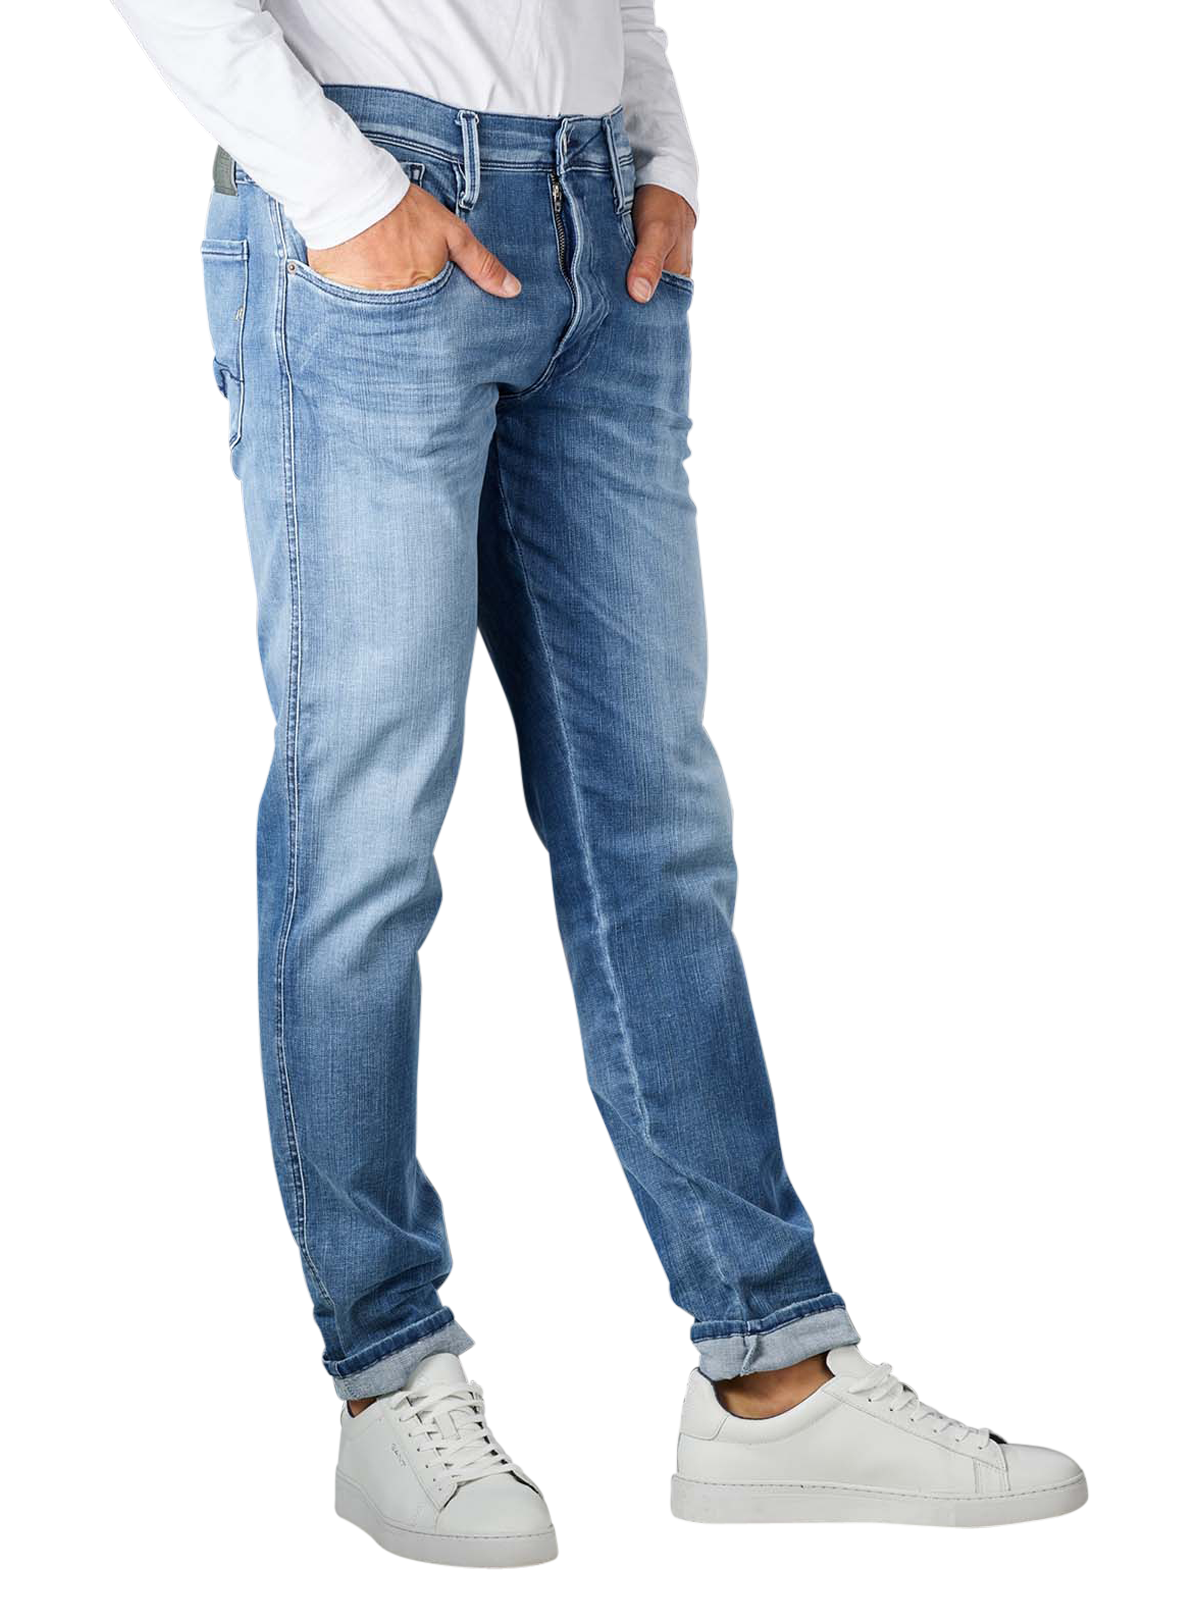 1152-replay-men-jeans-blue-denim-straight-fit-m914y-661-wi6-010-a.png